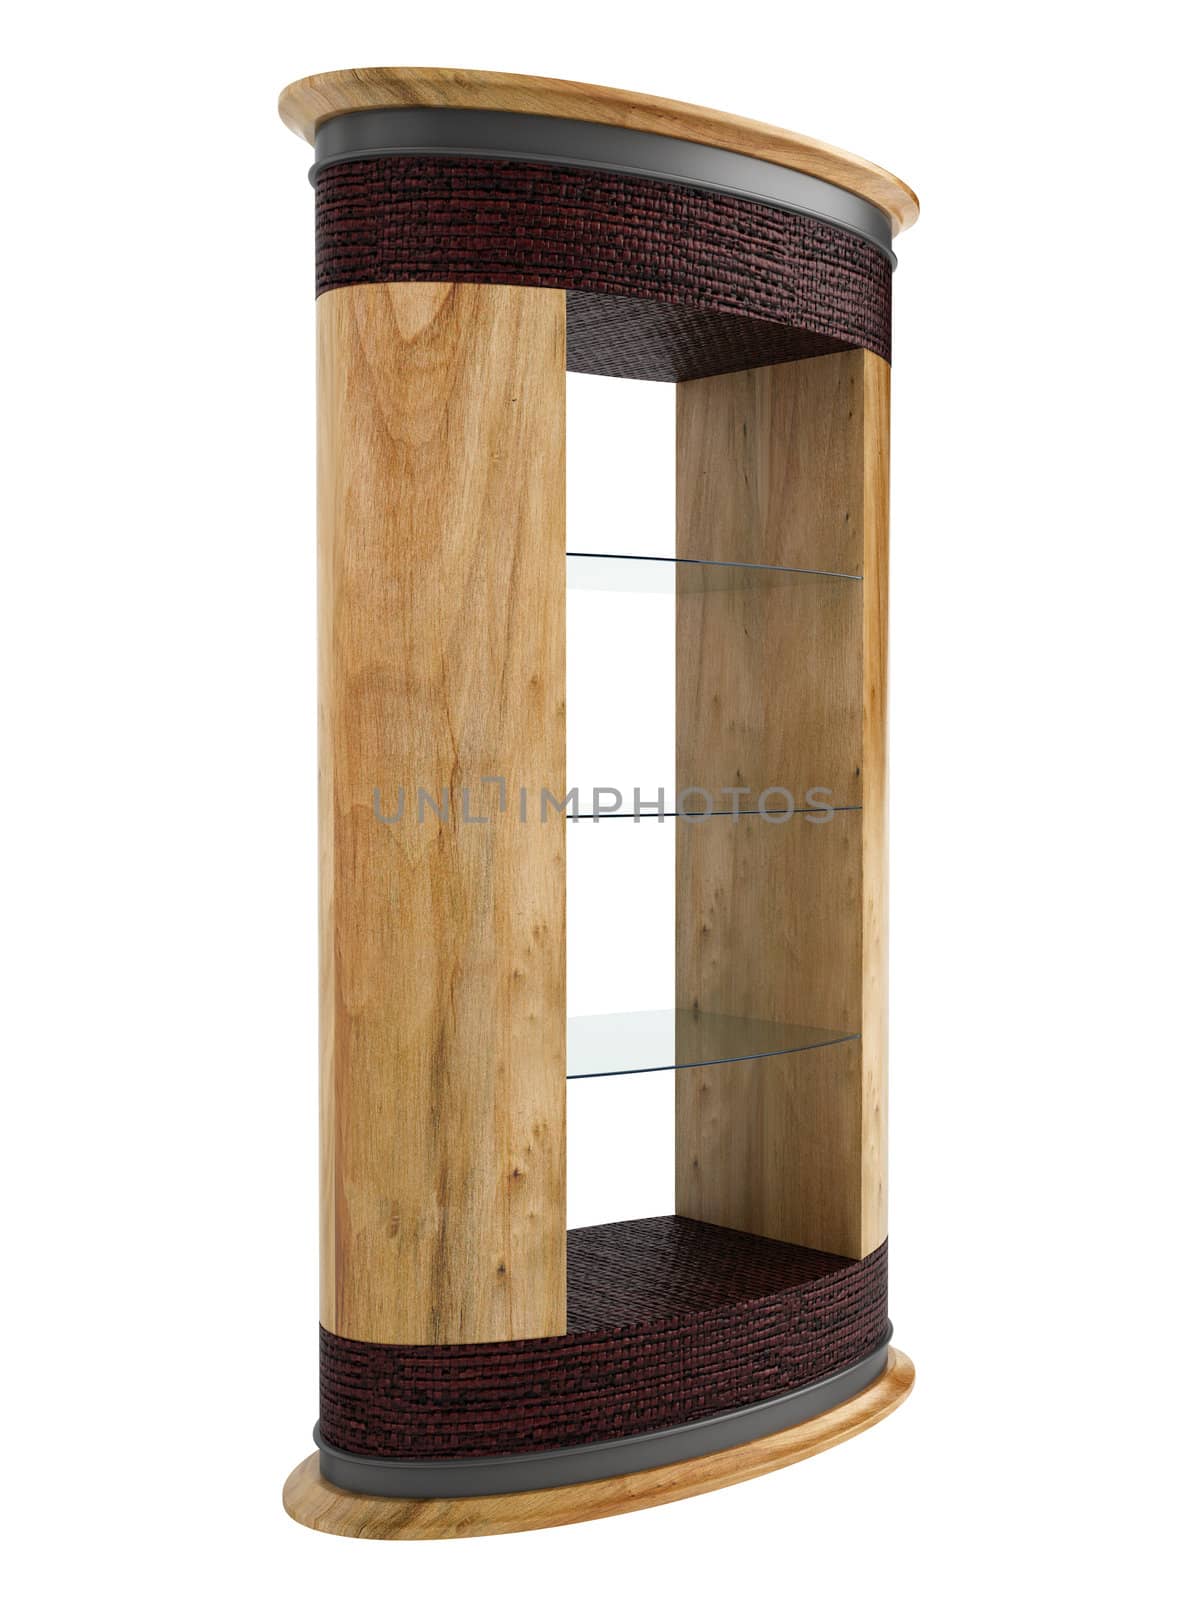 Wooden rack with glass shelves isolated on white background